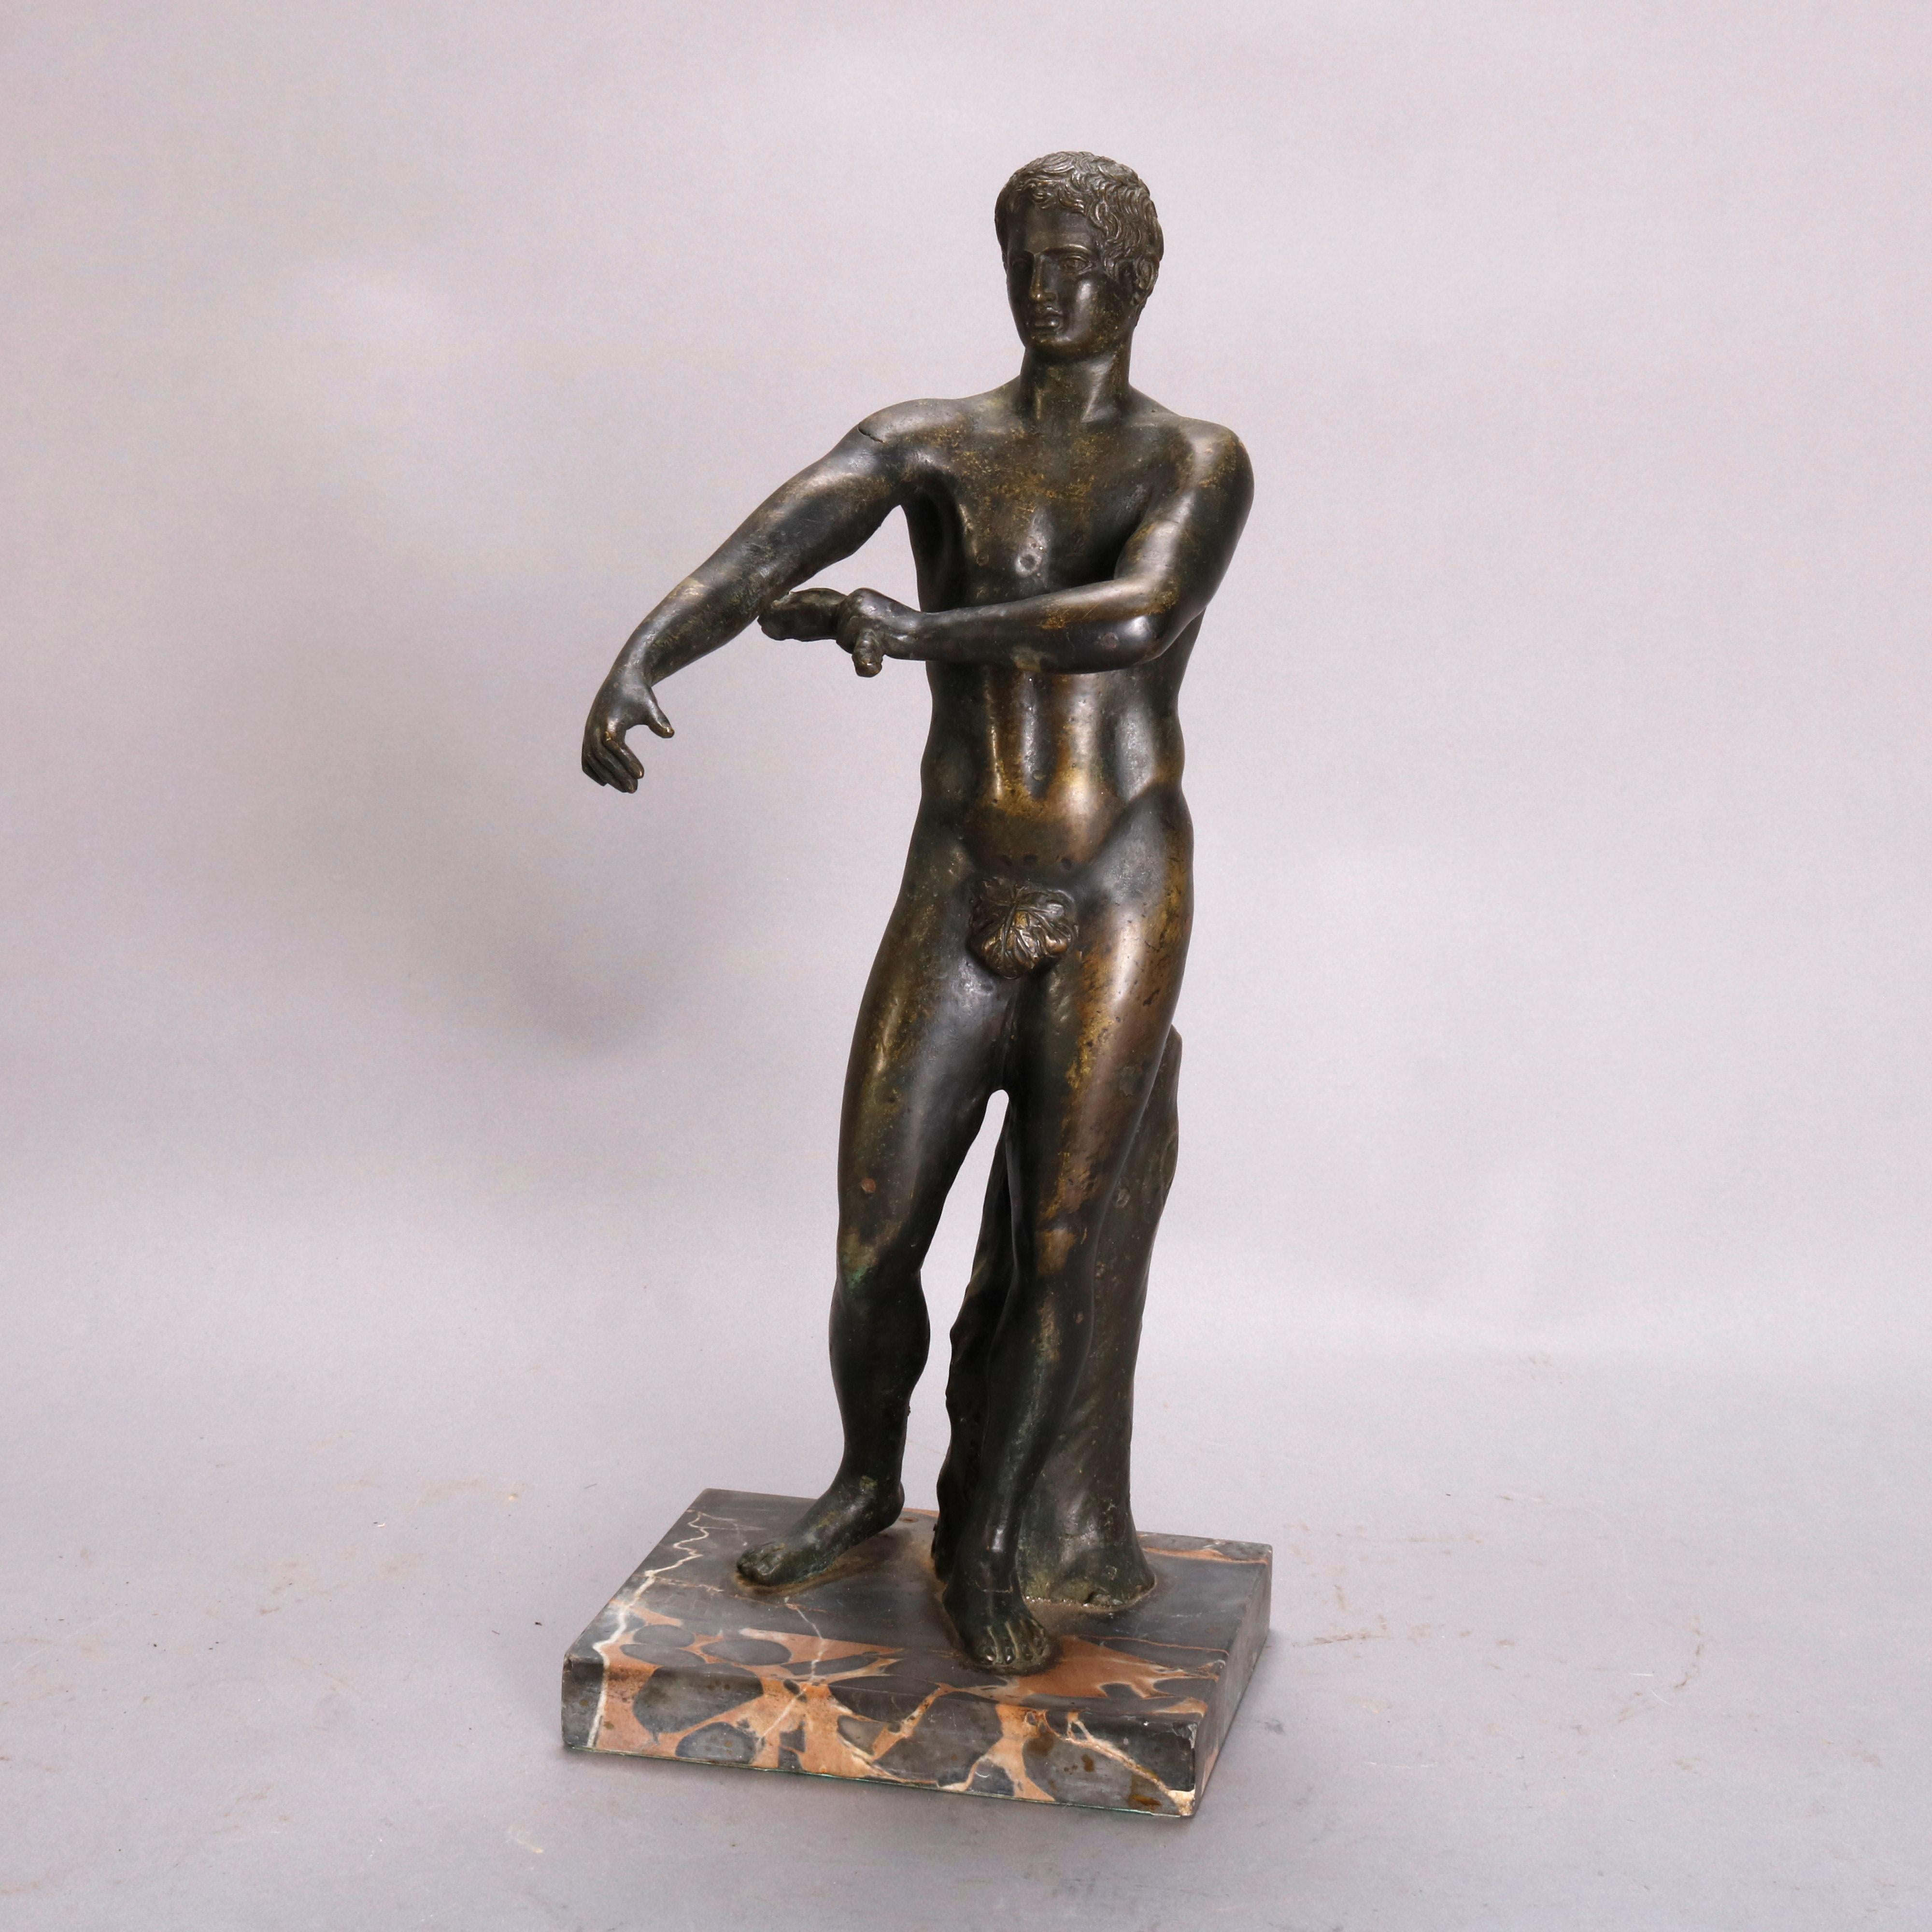 An antique grand tour figural bronze sculpture depicts full length portrait of classical Greek man mounted on marble base, circa 1890

***DELIVERY NOTICE – Due to COVID-19 we have employed LIMITED-TO-NO-CONTACT PRACTICES in the transfer of purchased